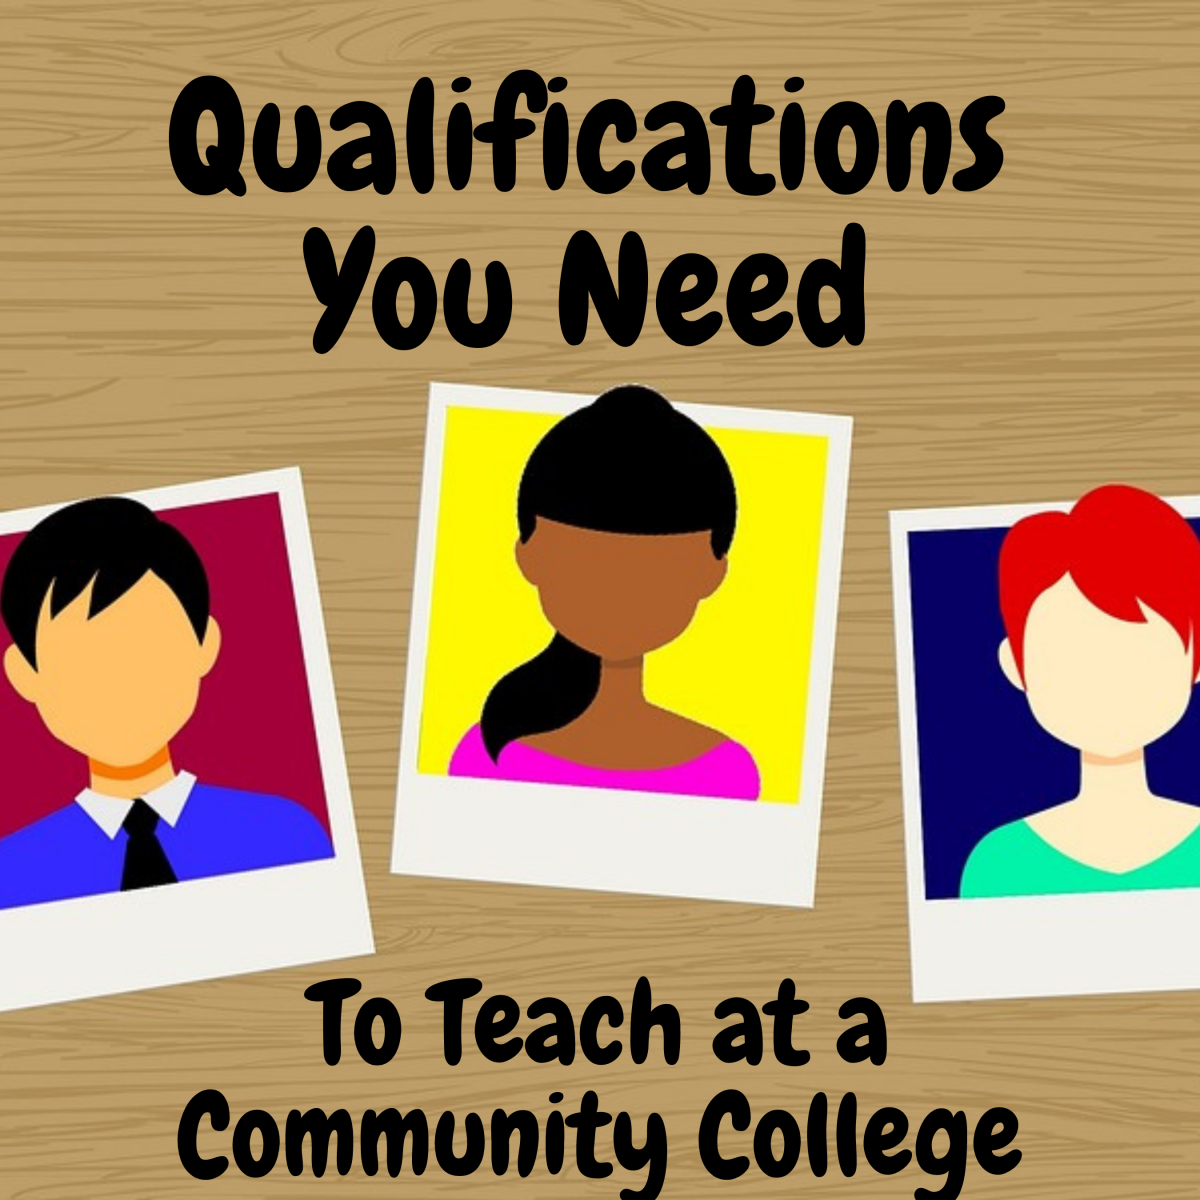 Qualifications Needed to Teach at a Community College